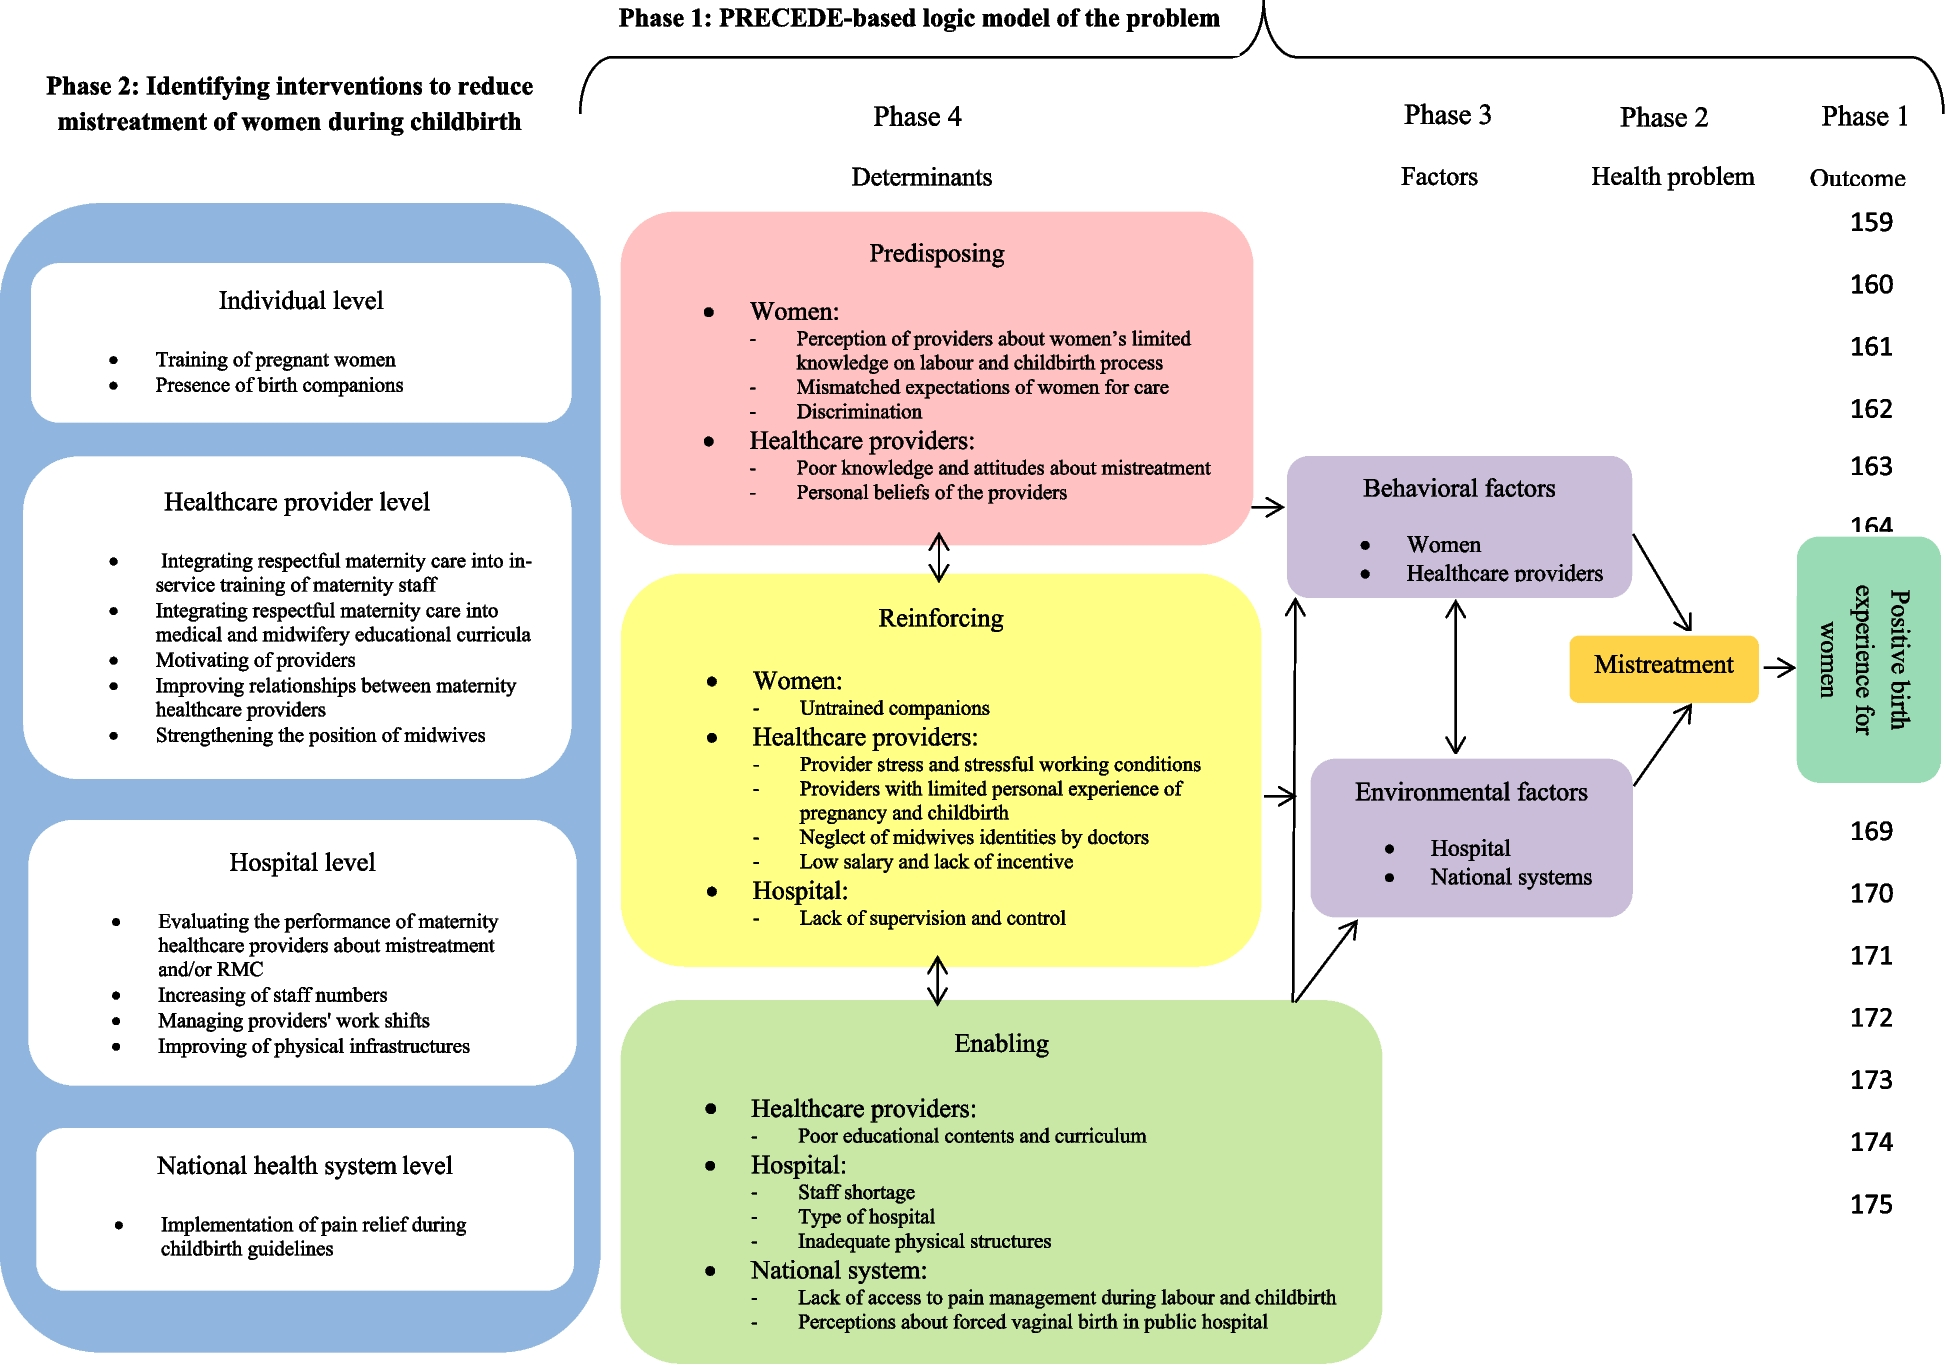 Challenges to the implementation of a multi-level intervention to reduce mistreatment of women during childbirth in Iran: a qualitative study using the Consolidated Framework for Implementation Research